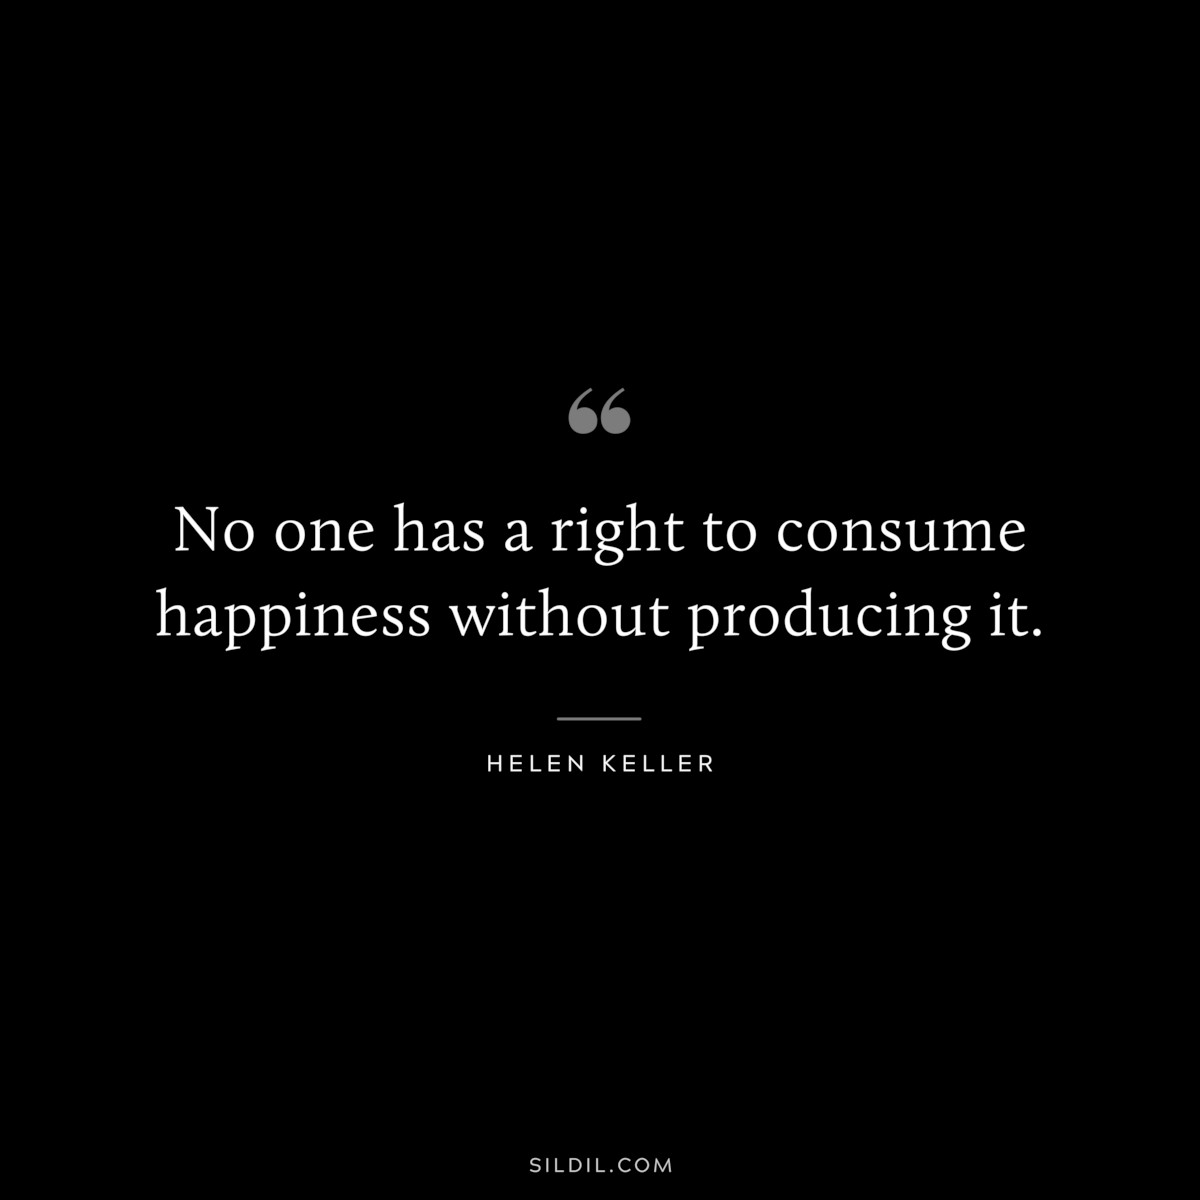 No one has a right to consume happiness without producing it. ― Helen Keller